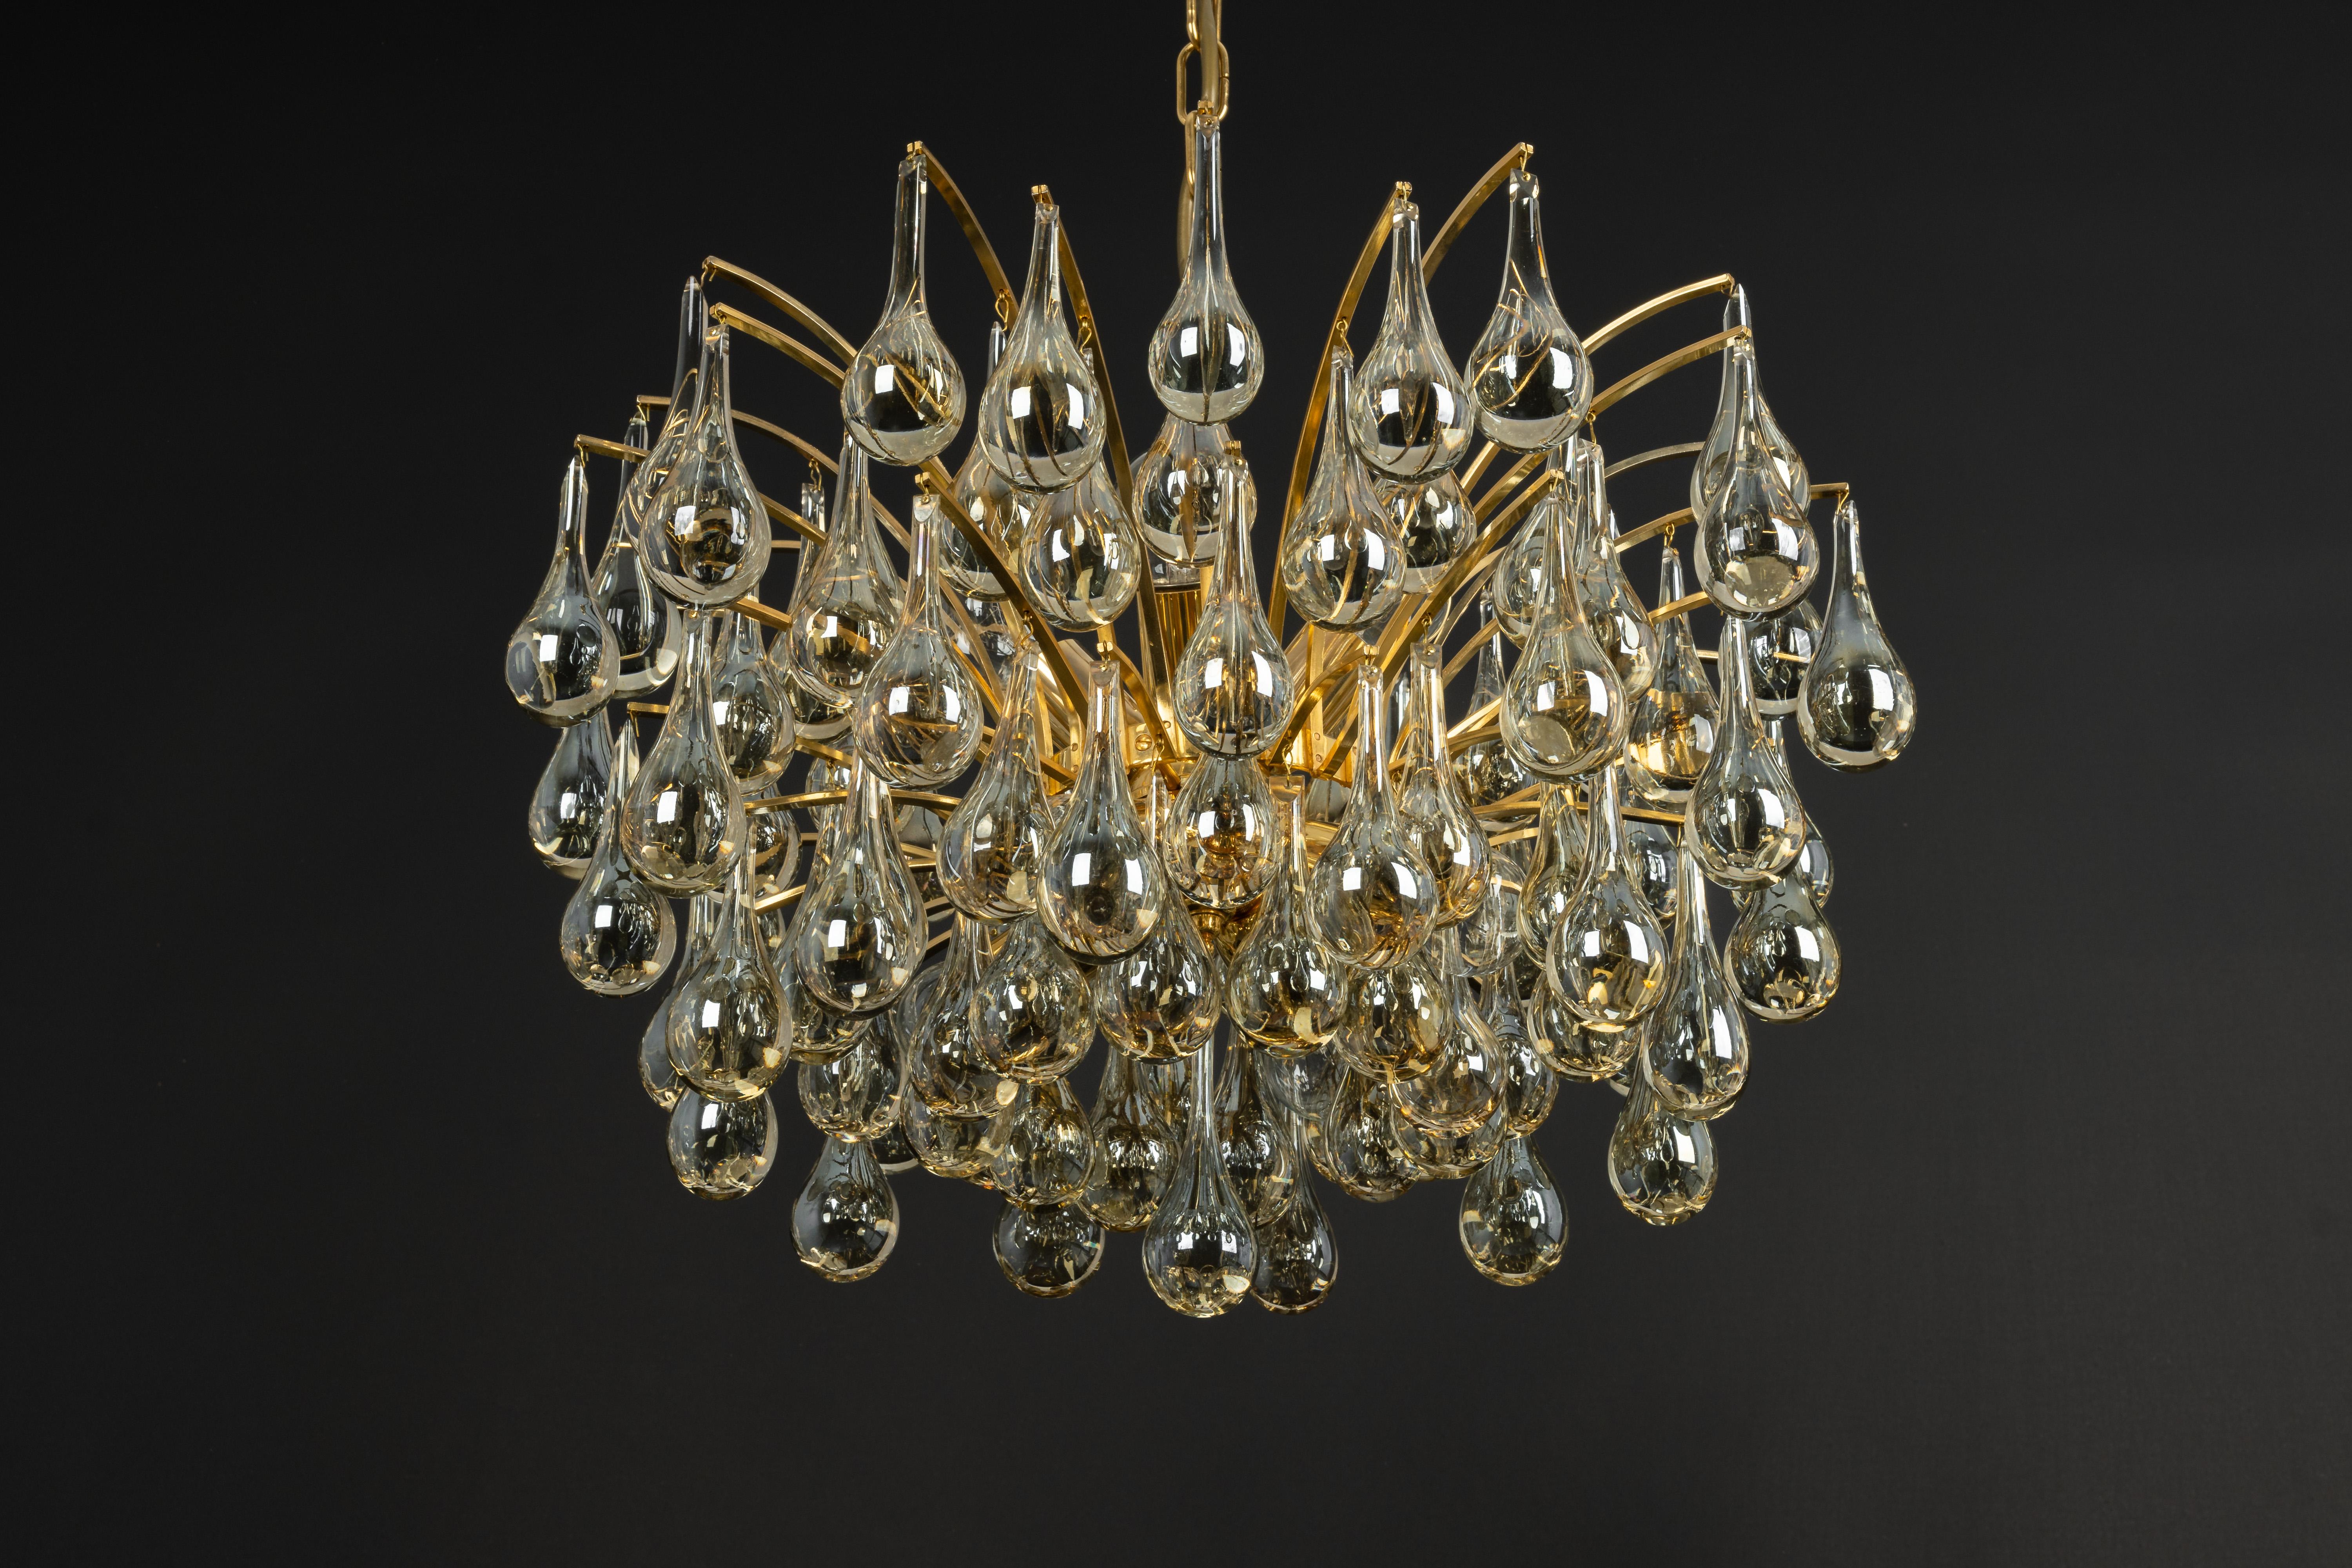 Large Murano Glass Tear Drop Chandelier, Christoph Palme, Germany, 1970s For Sale 6